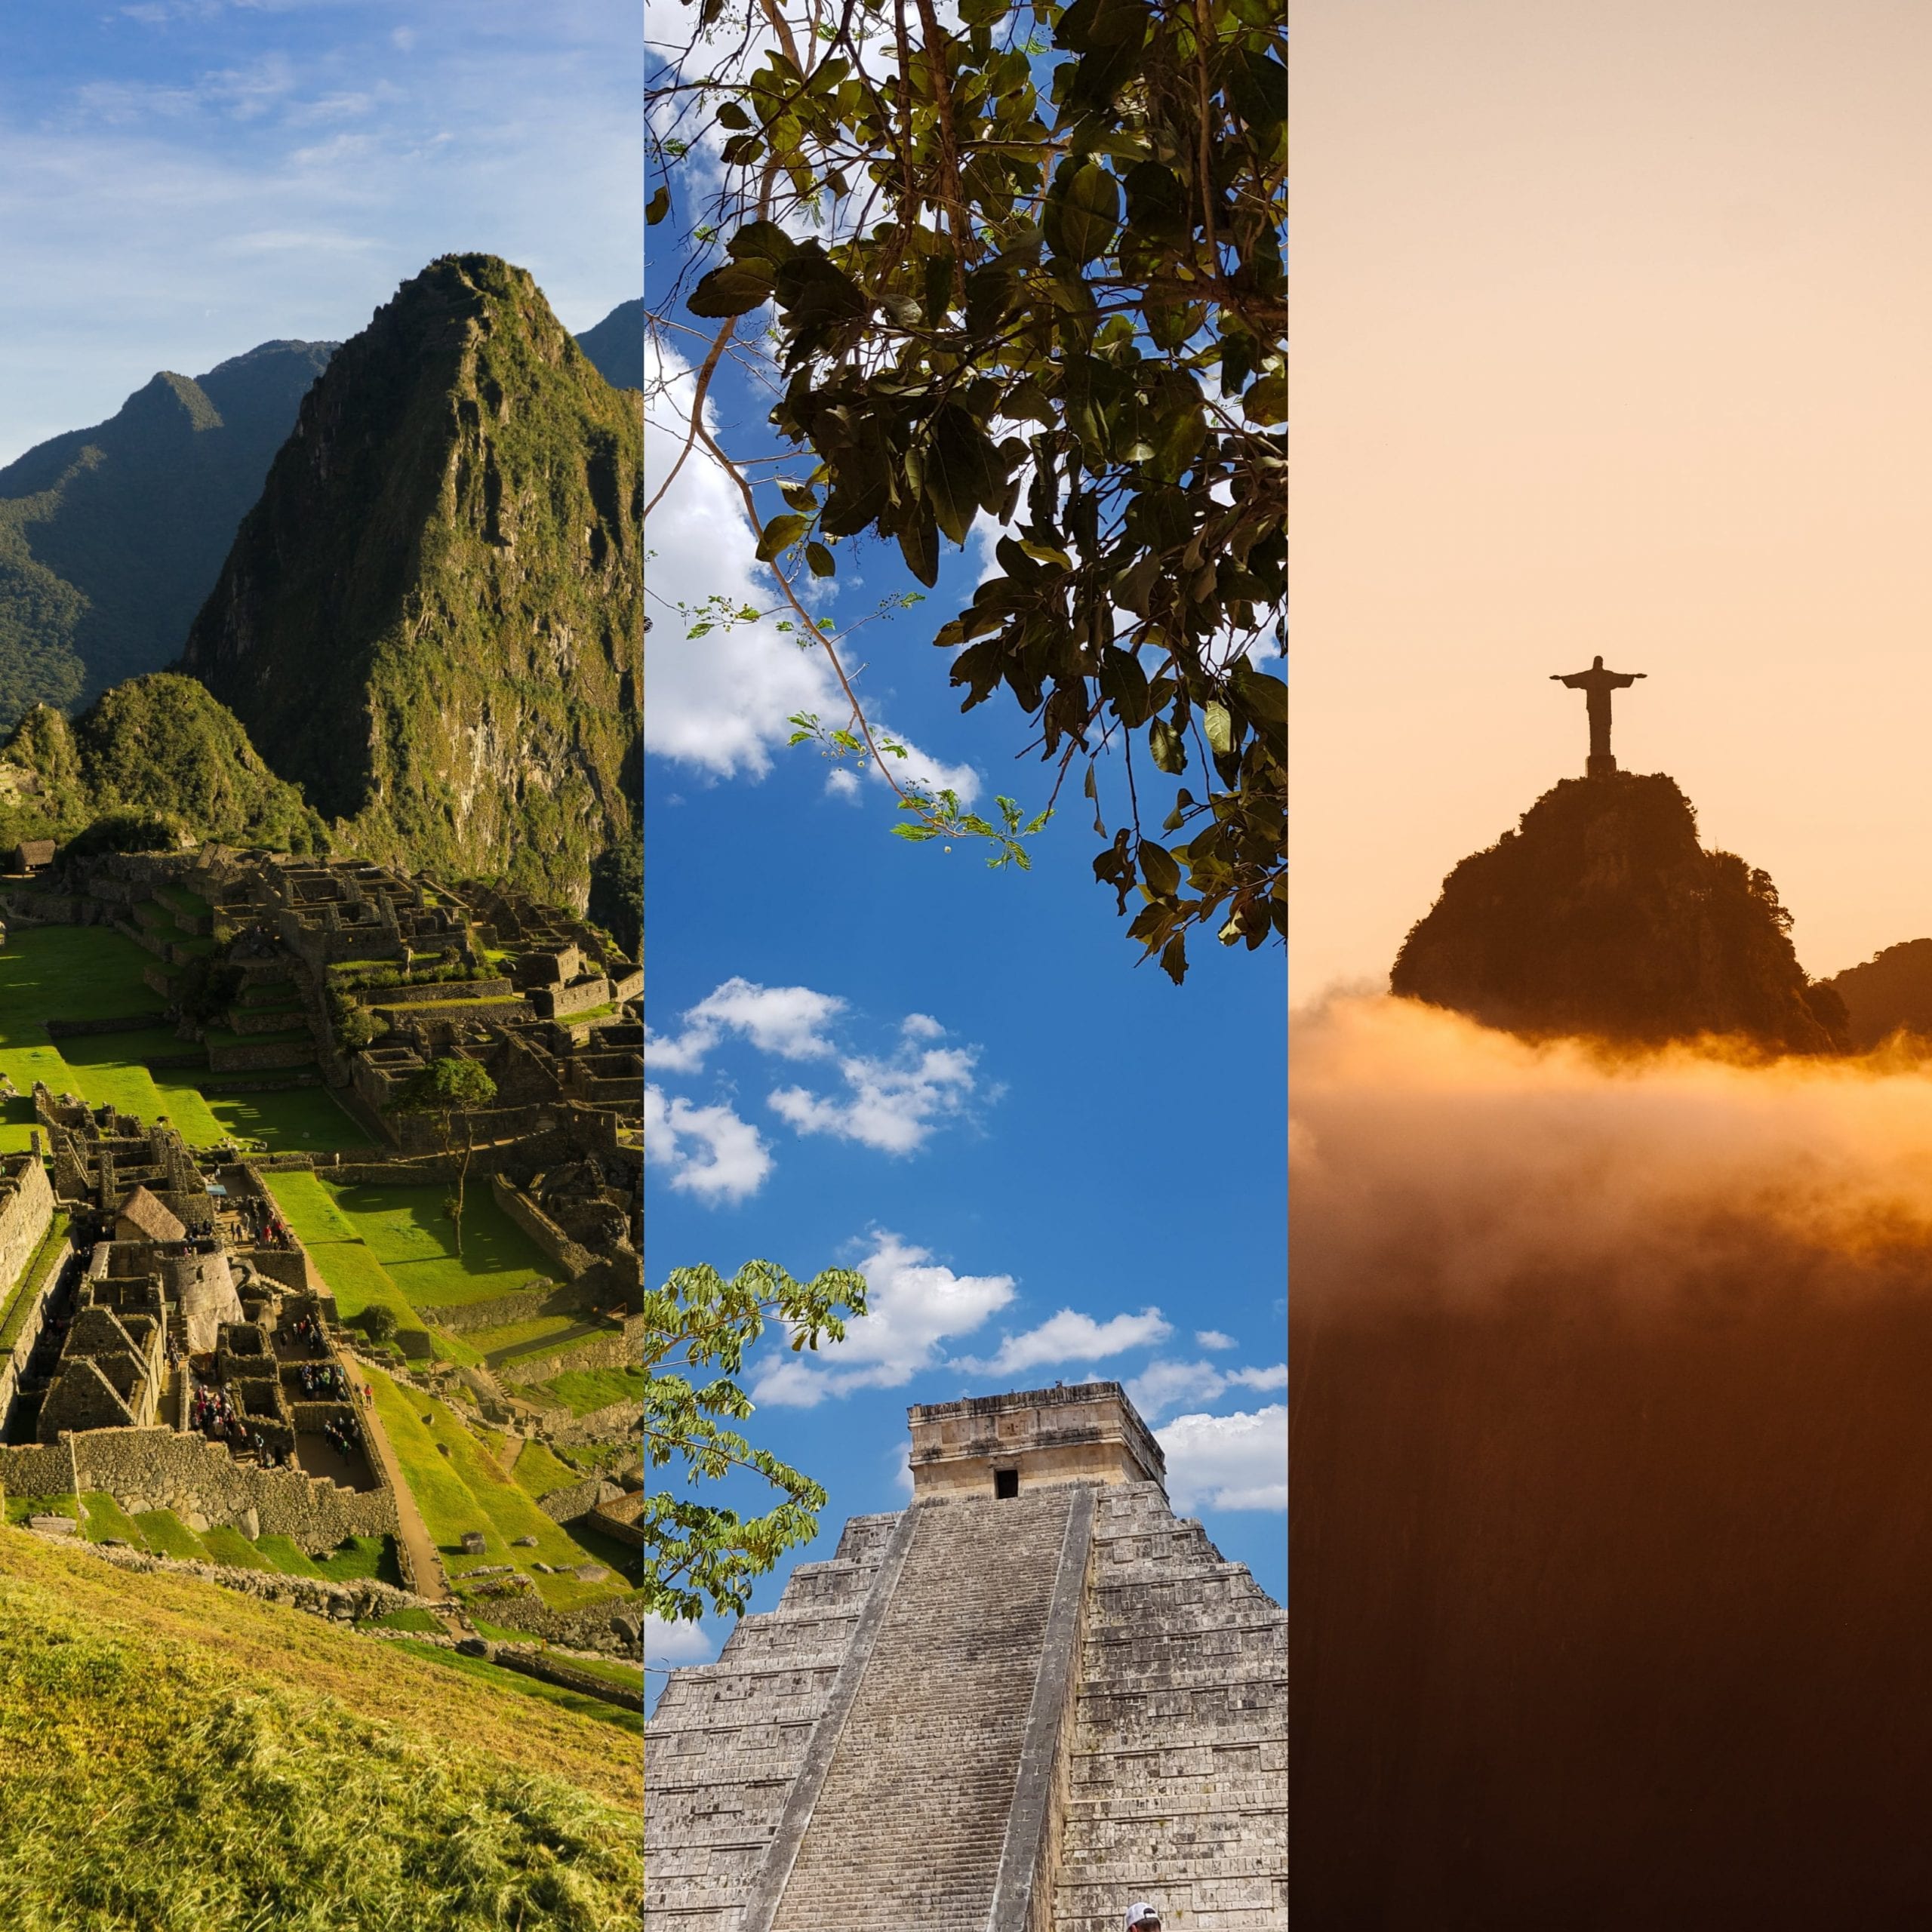 Latin America is home to which of these new Seven Wonders of the World scaled